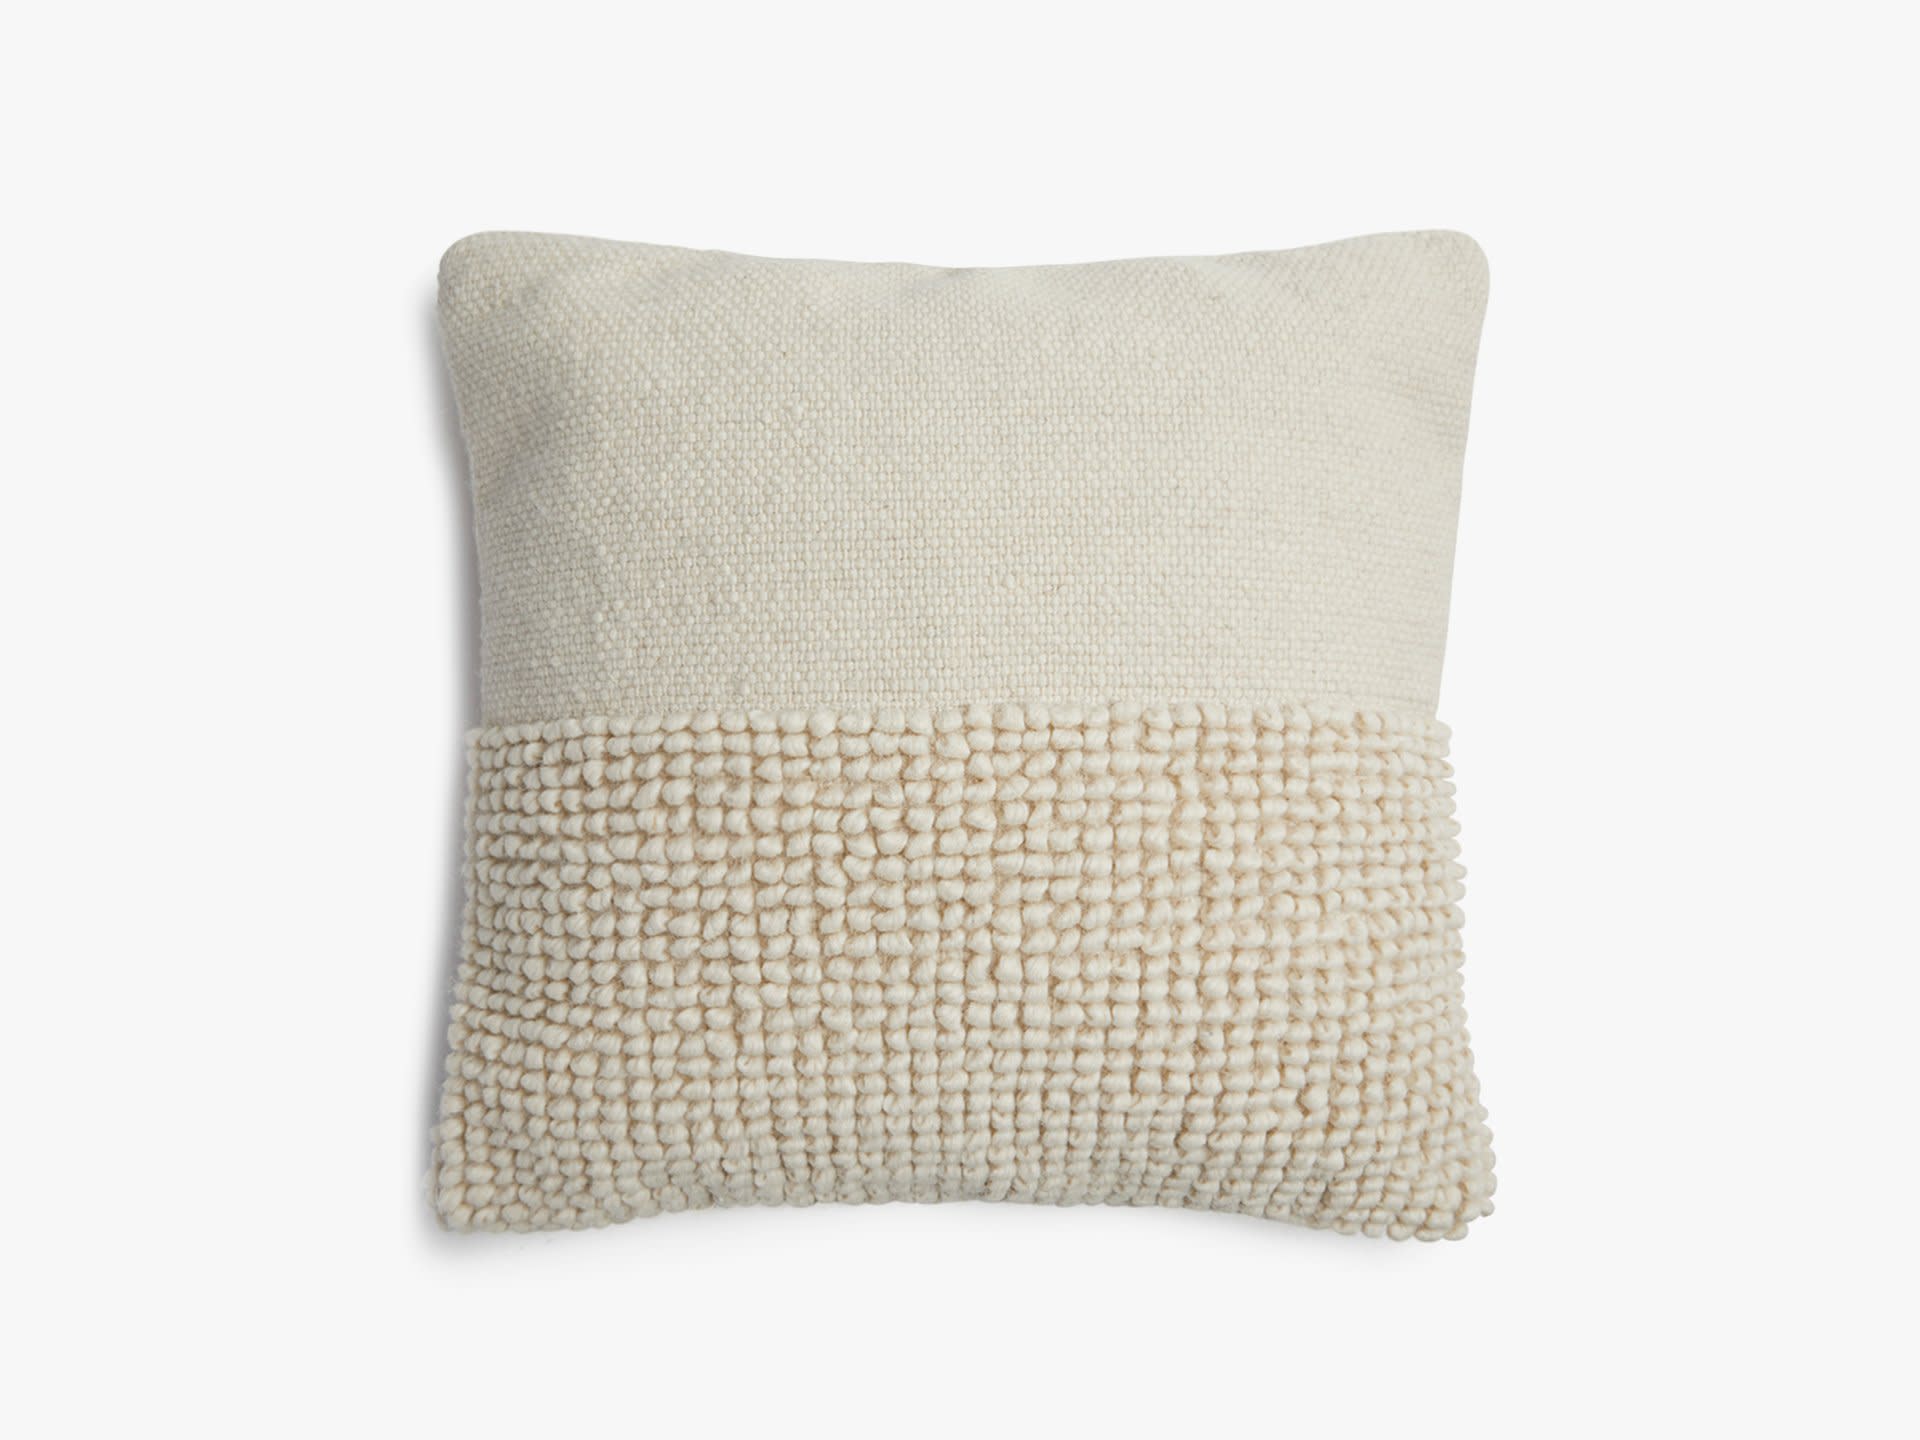 Berber Pillow Cover Product Image